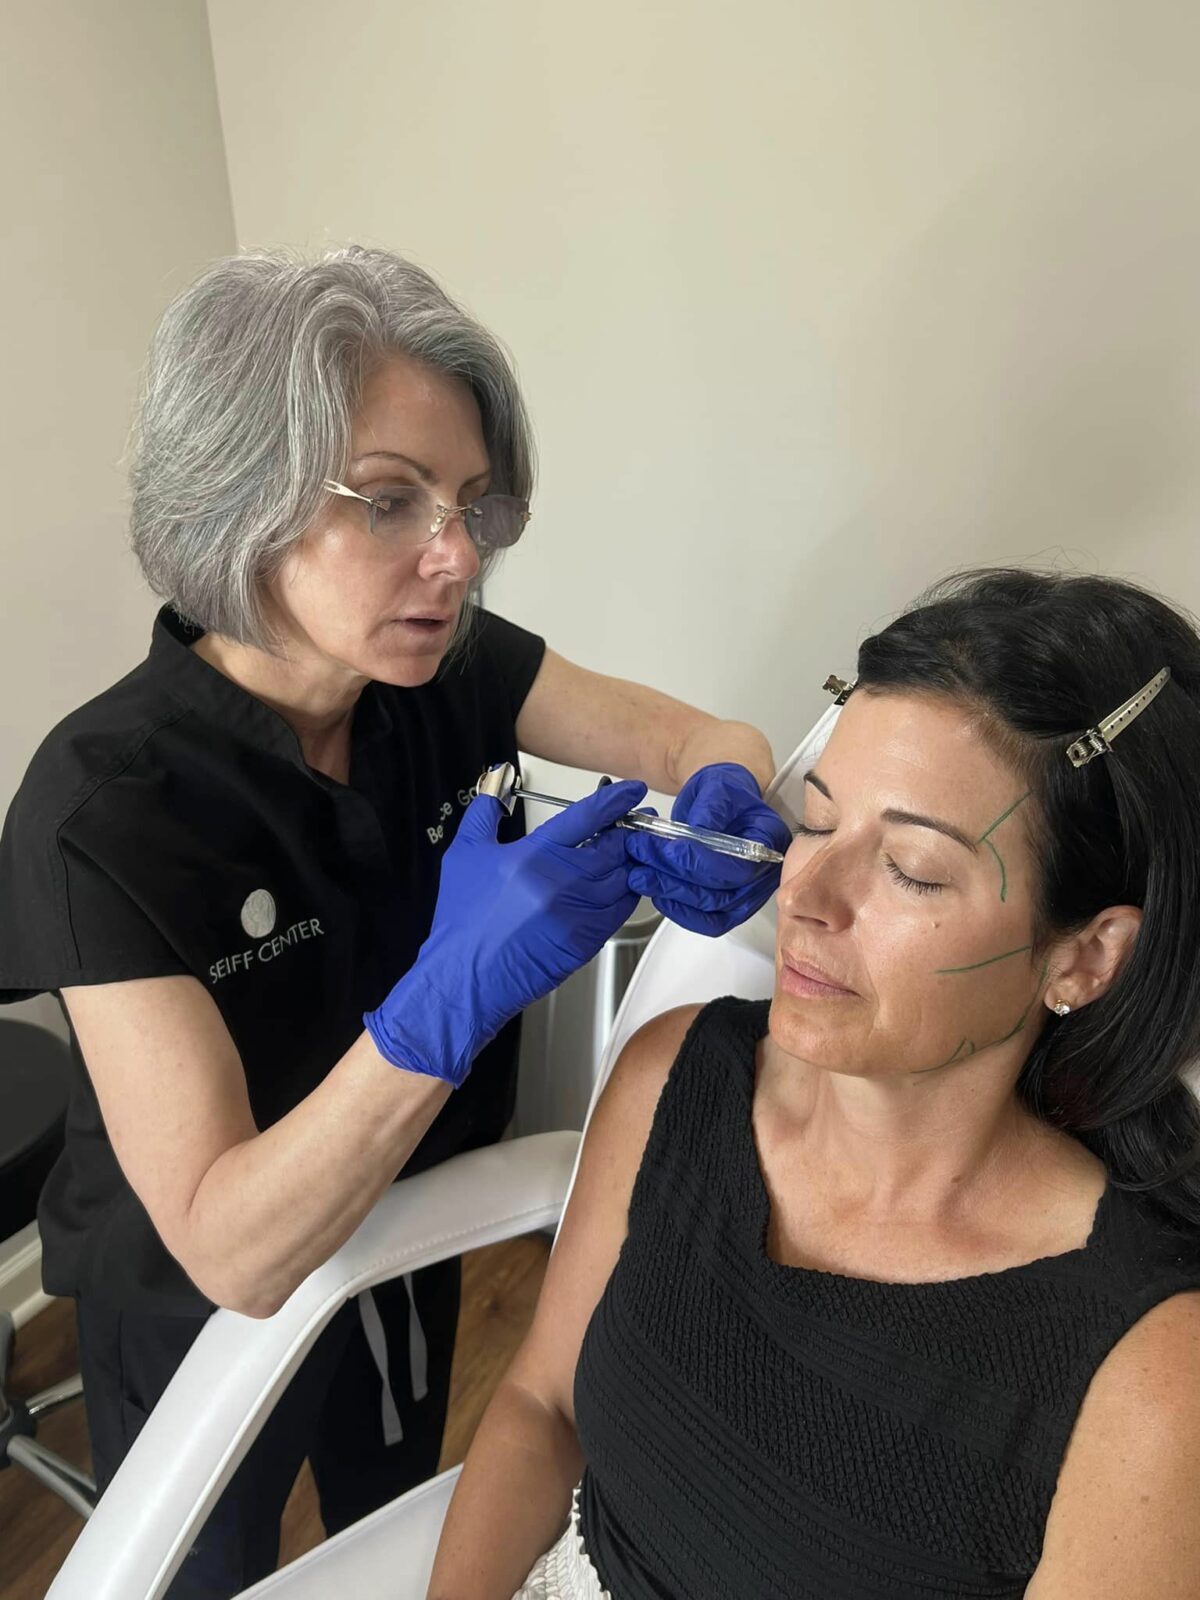 The Seiff Center: Where Expertise Meets Excellence in Skincare